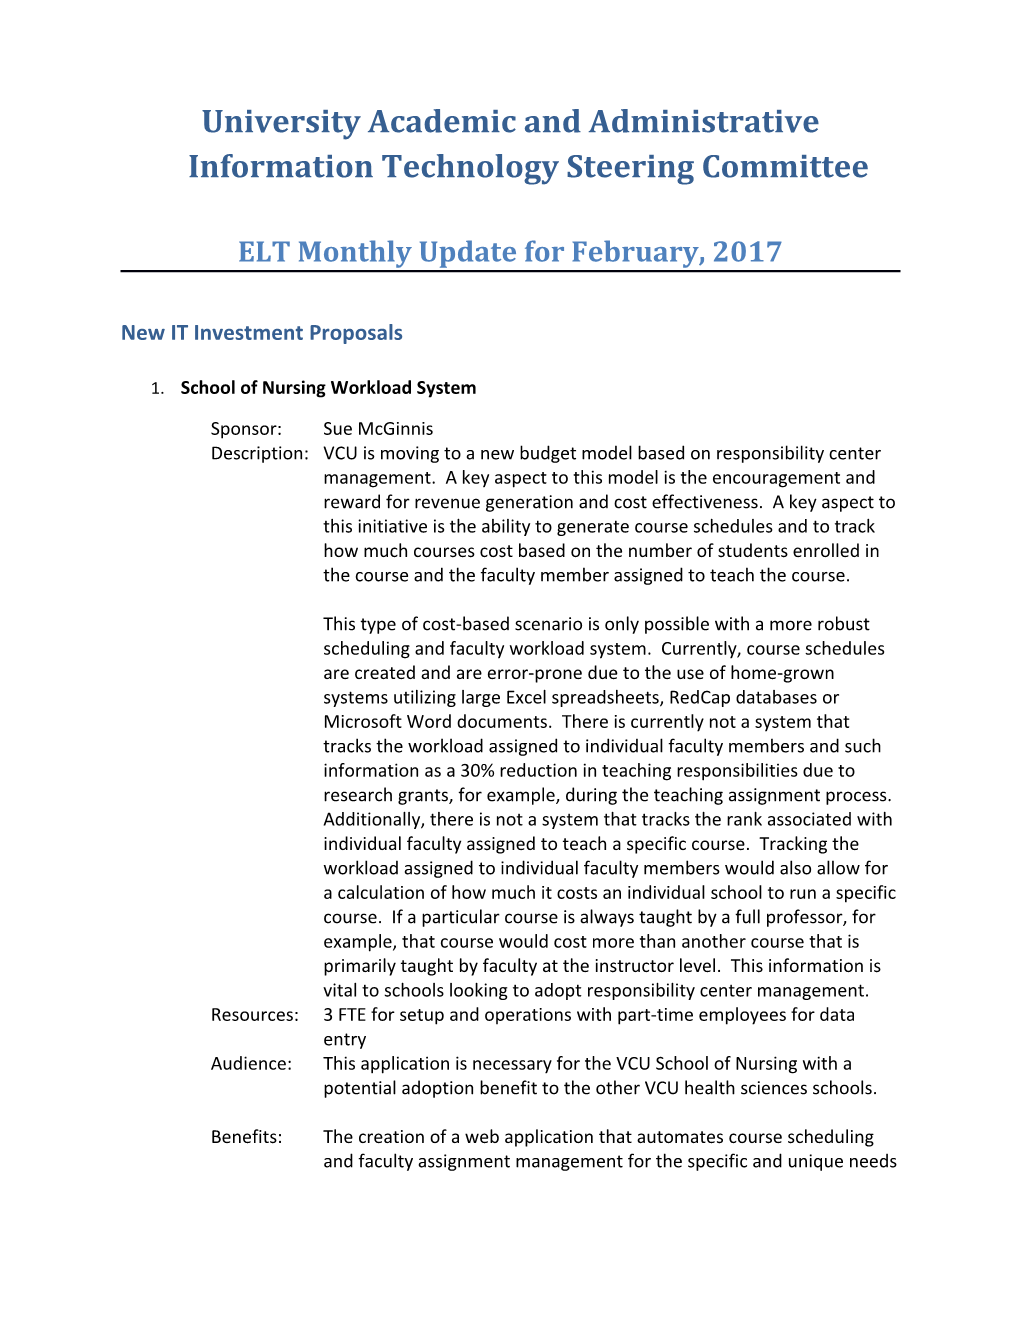 University Academic and Administrative Information Technology Steering Committee s1